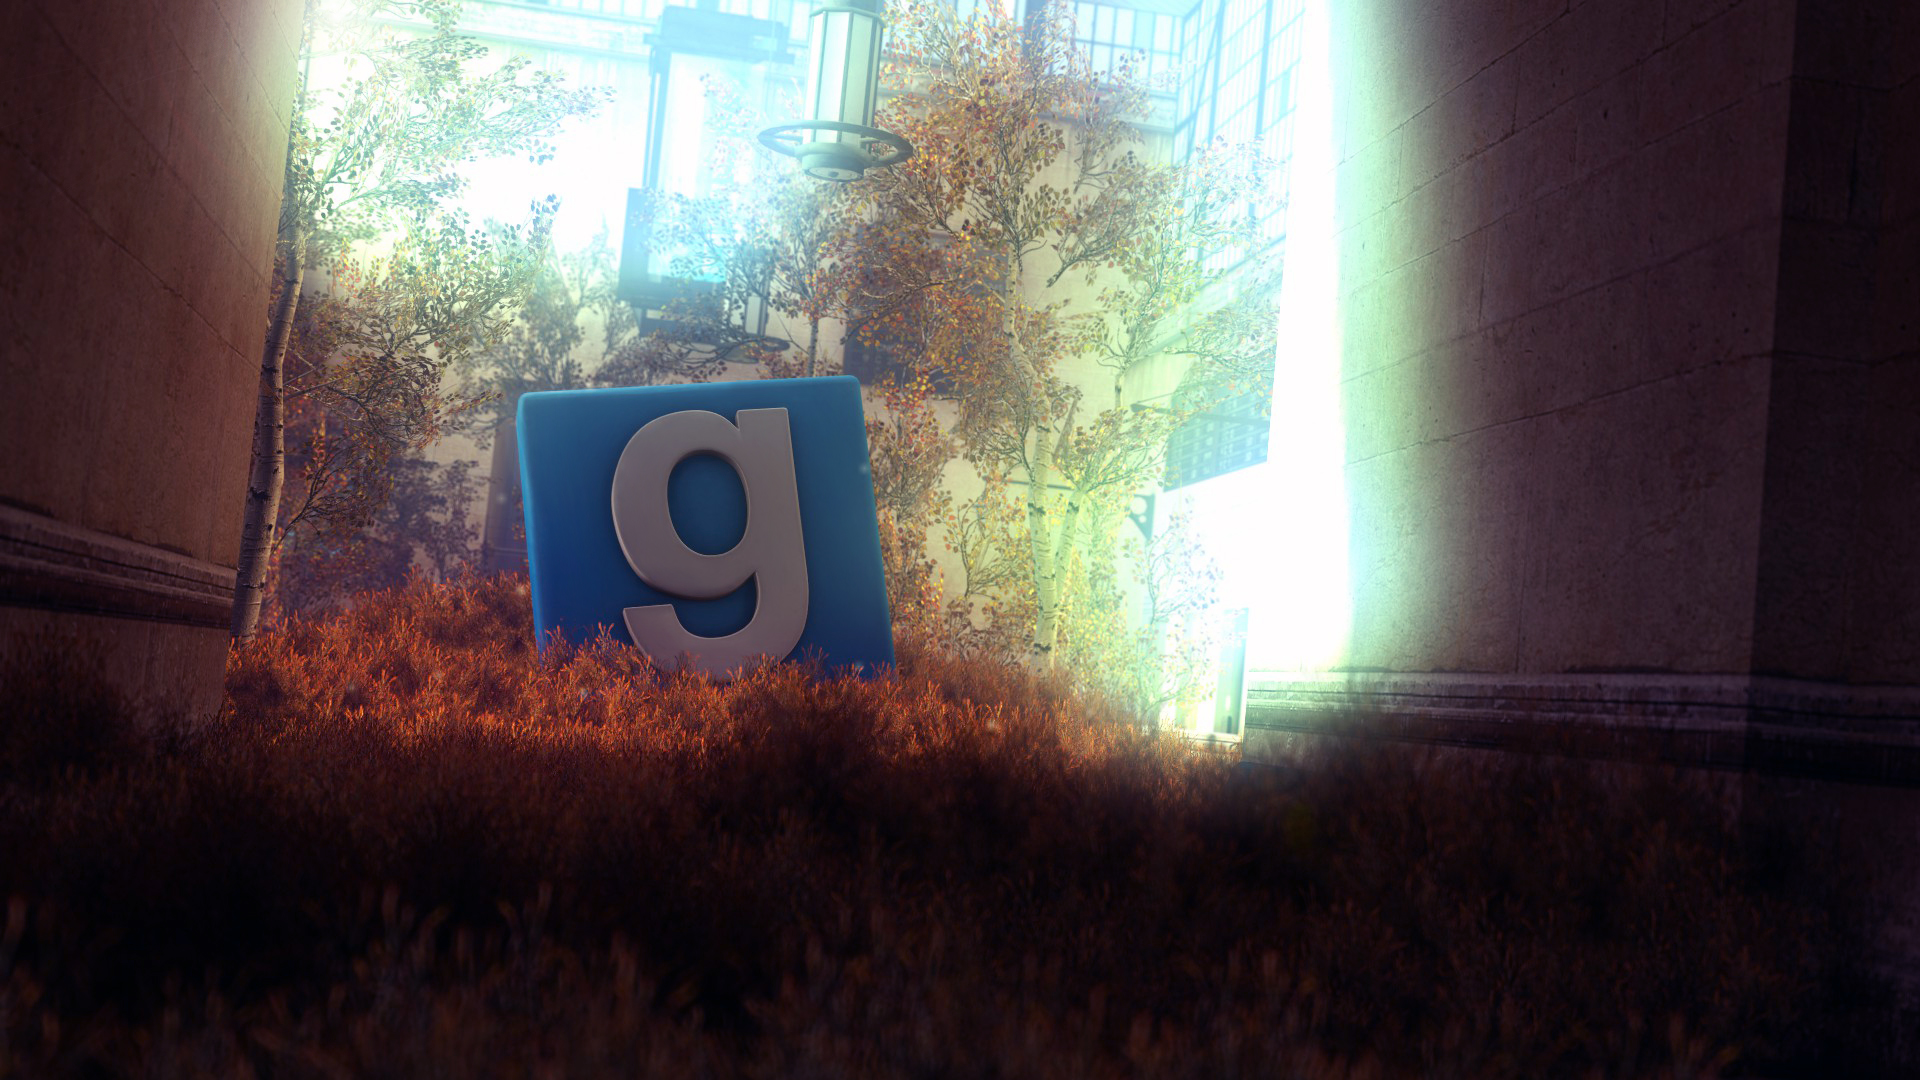 Garry S Mod And Photoshop By Noga14